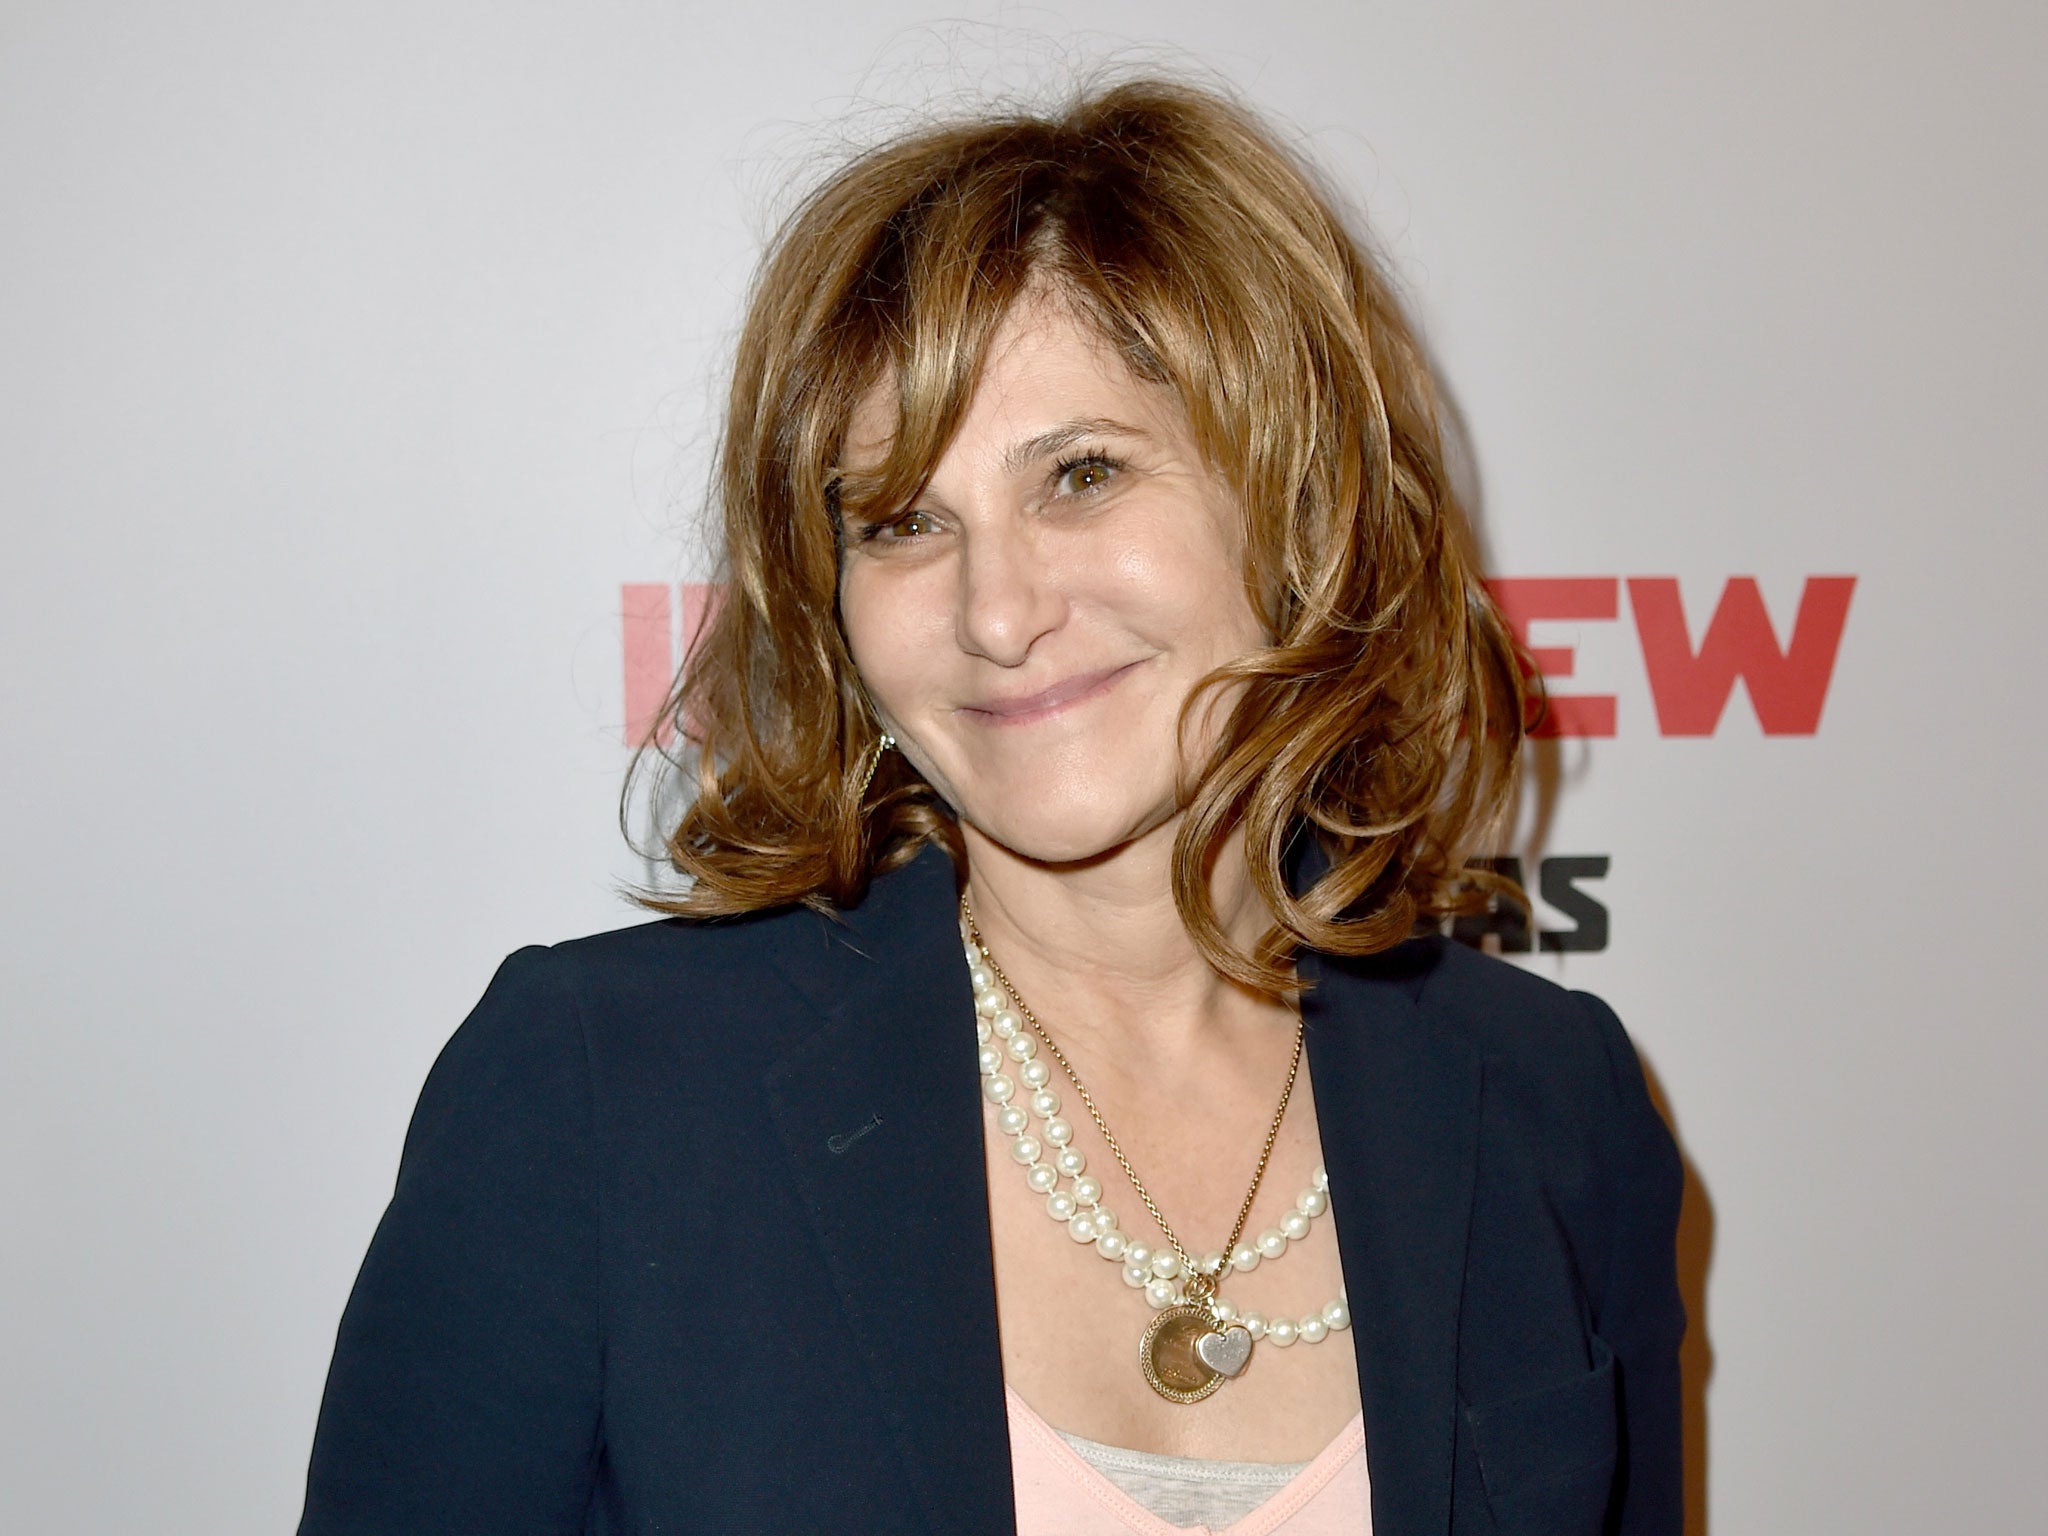 Hollywood executive Amy Pascal was one of several high-profile women allegedly impersonated by the suspect